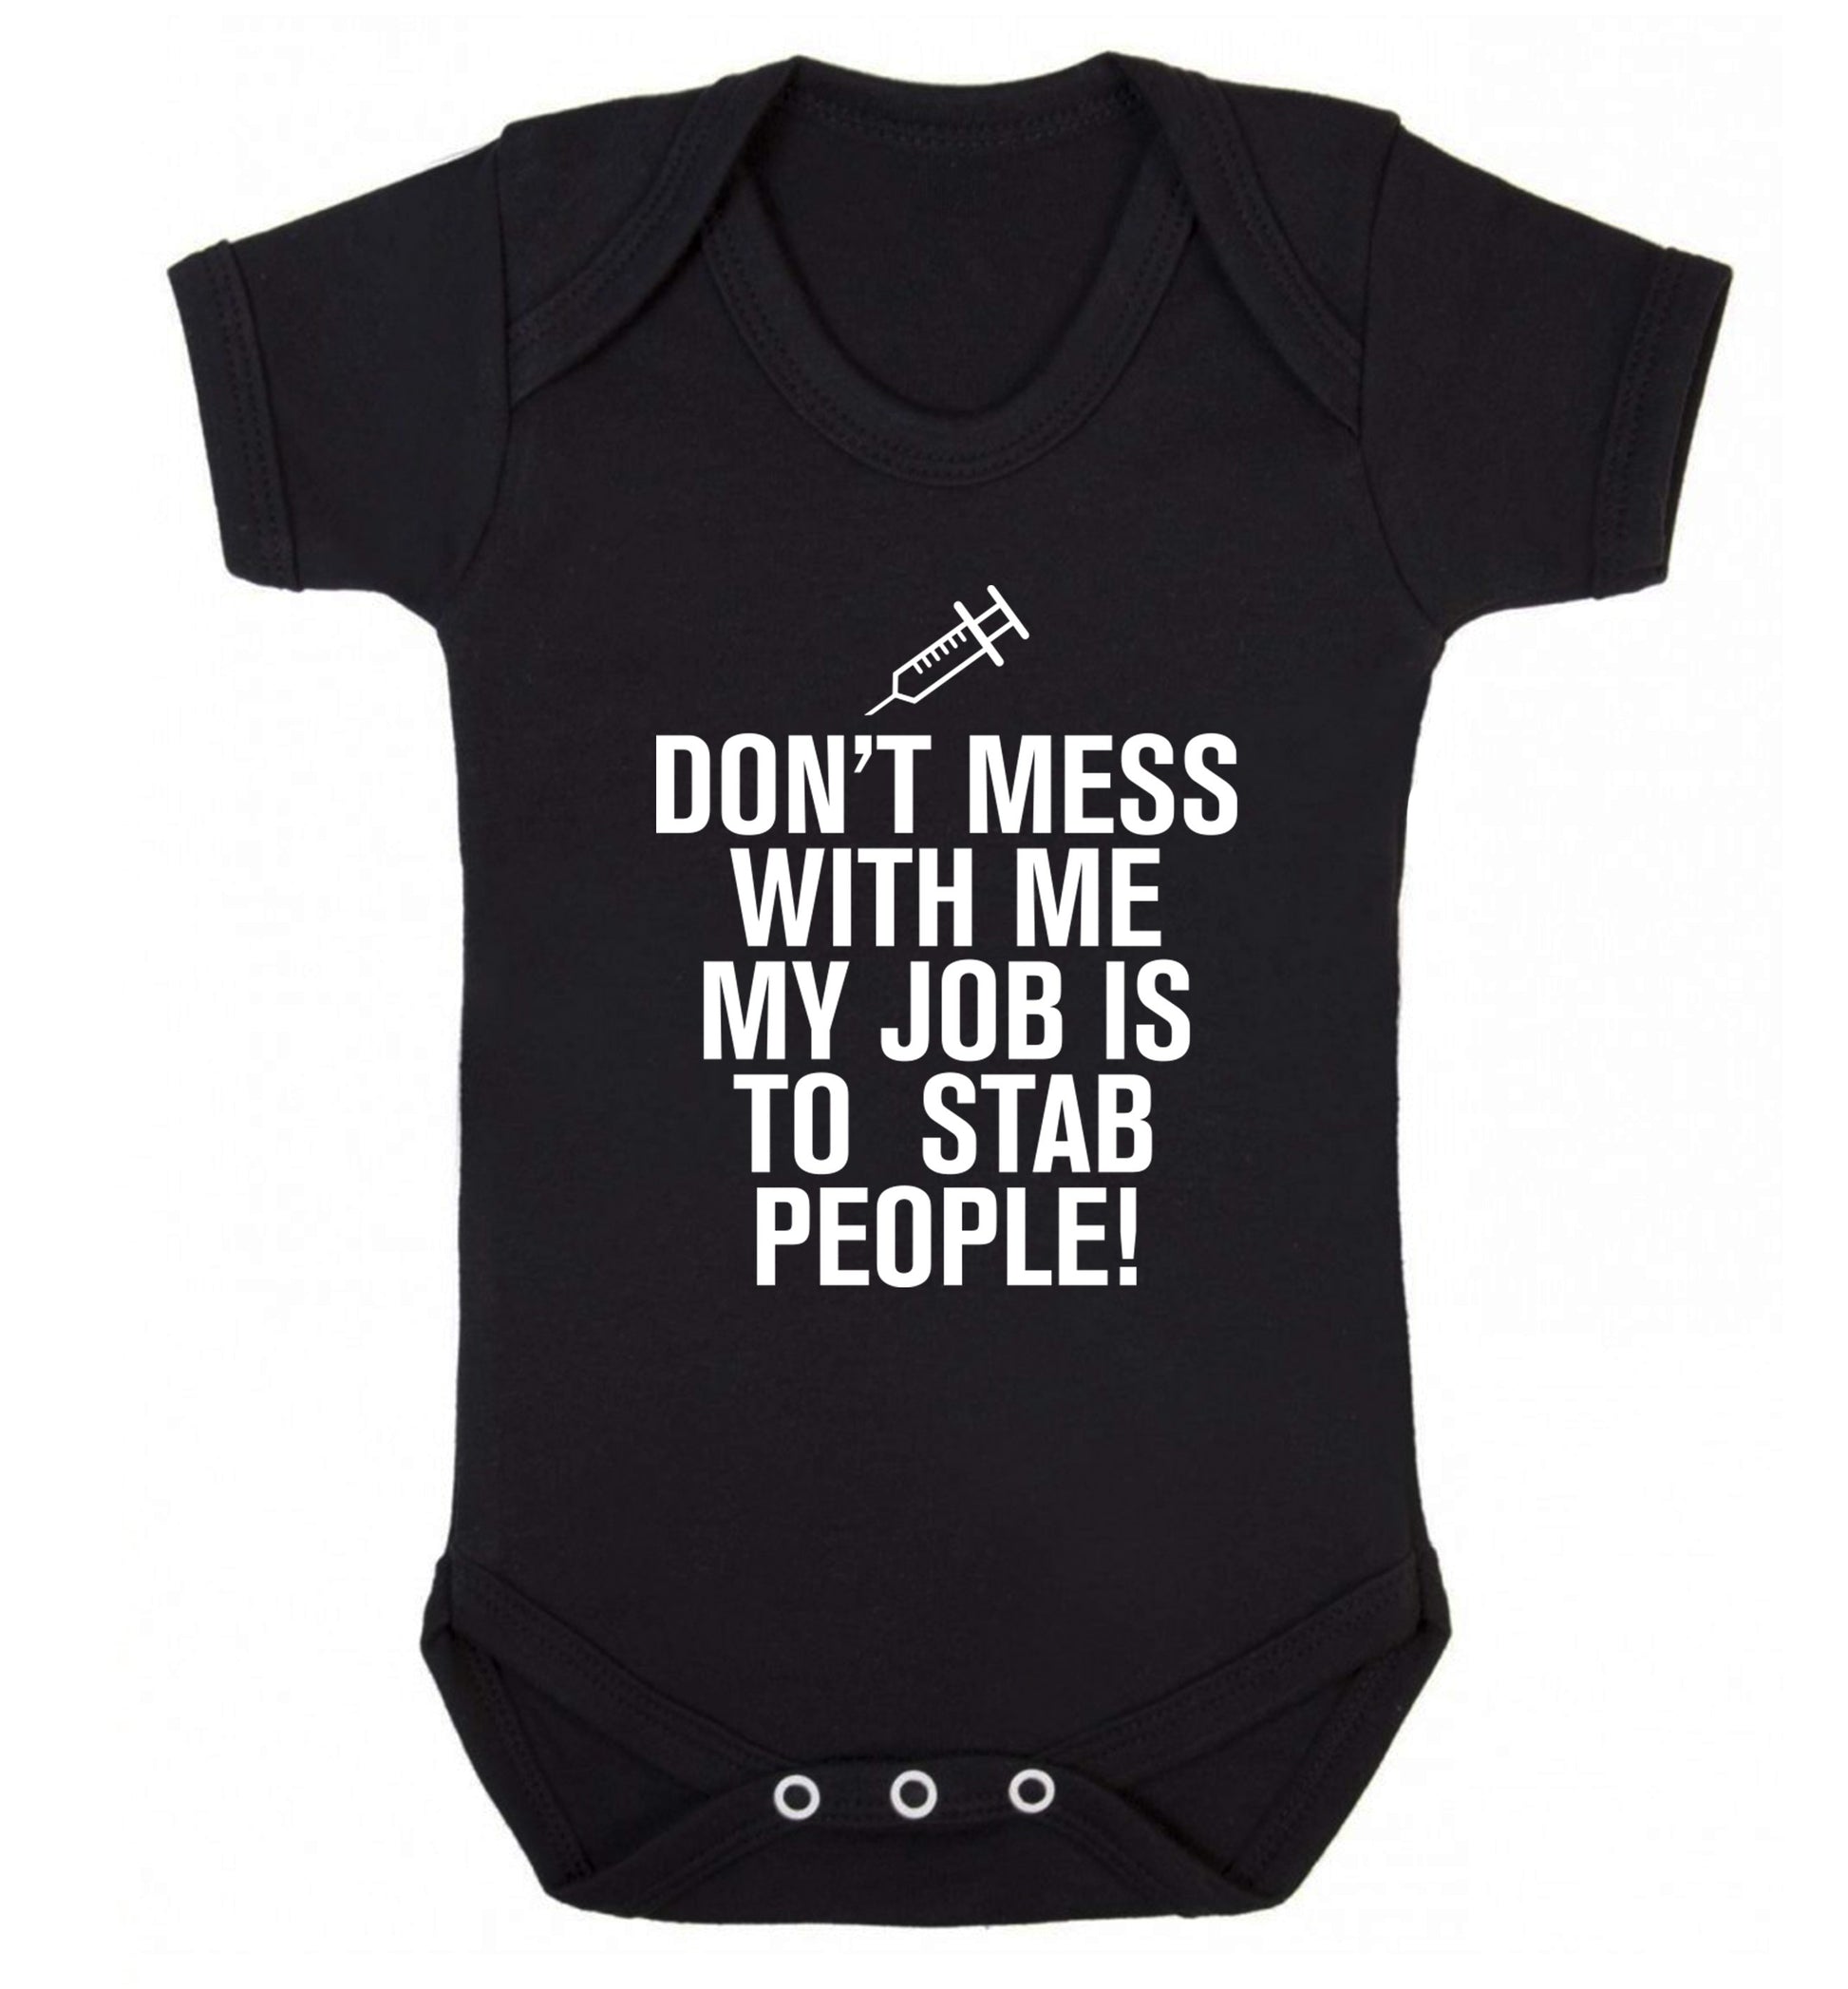 Don't mess with me my job is to stab people! Baby Vest black 18-24 months